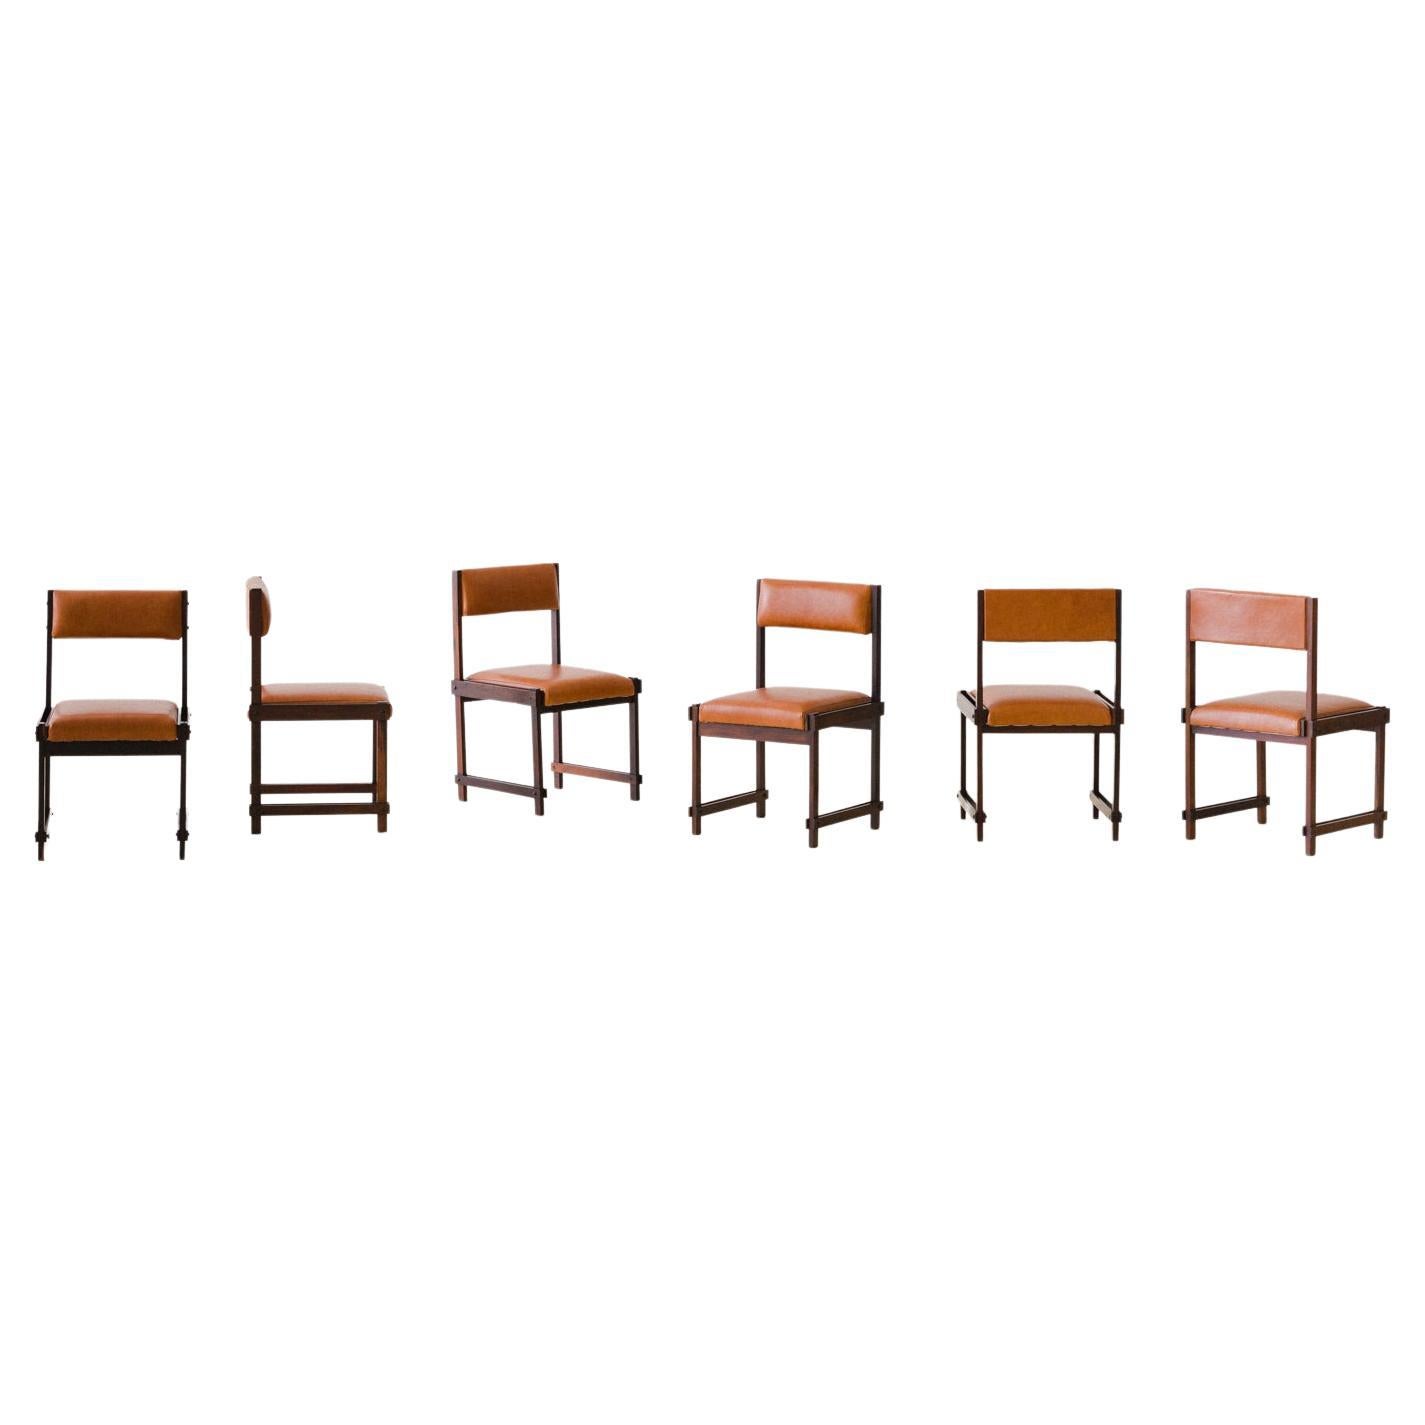 Brazilian Rosewood Dining Chairs by FAI 'Fatima Arquitetura Interiores', 1960s